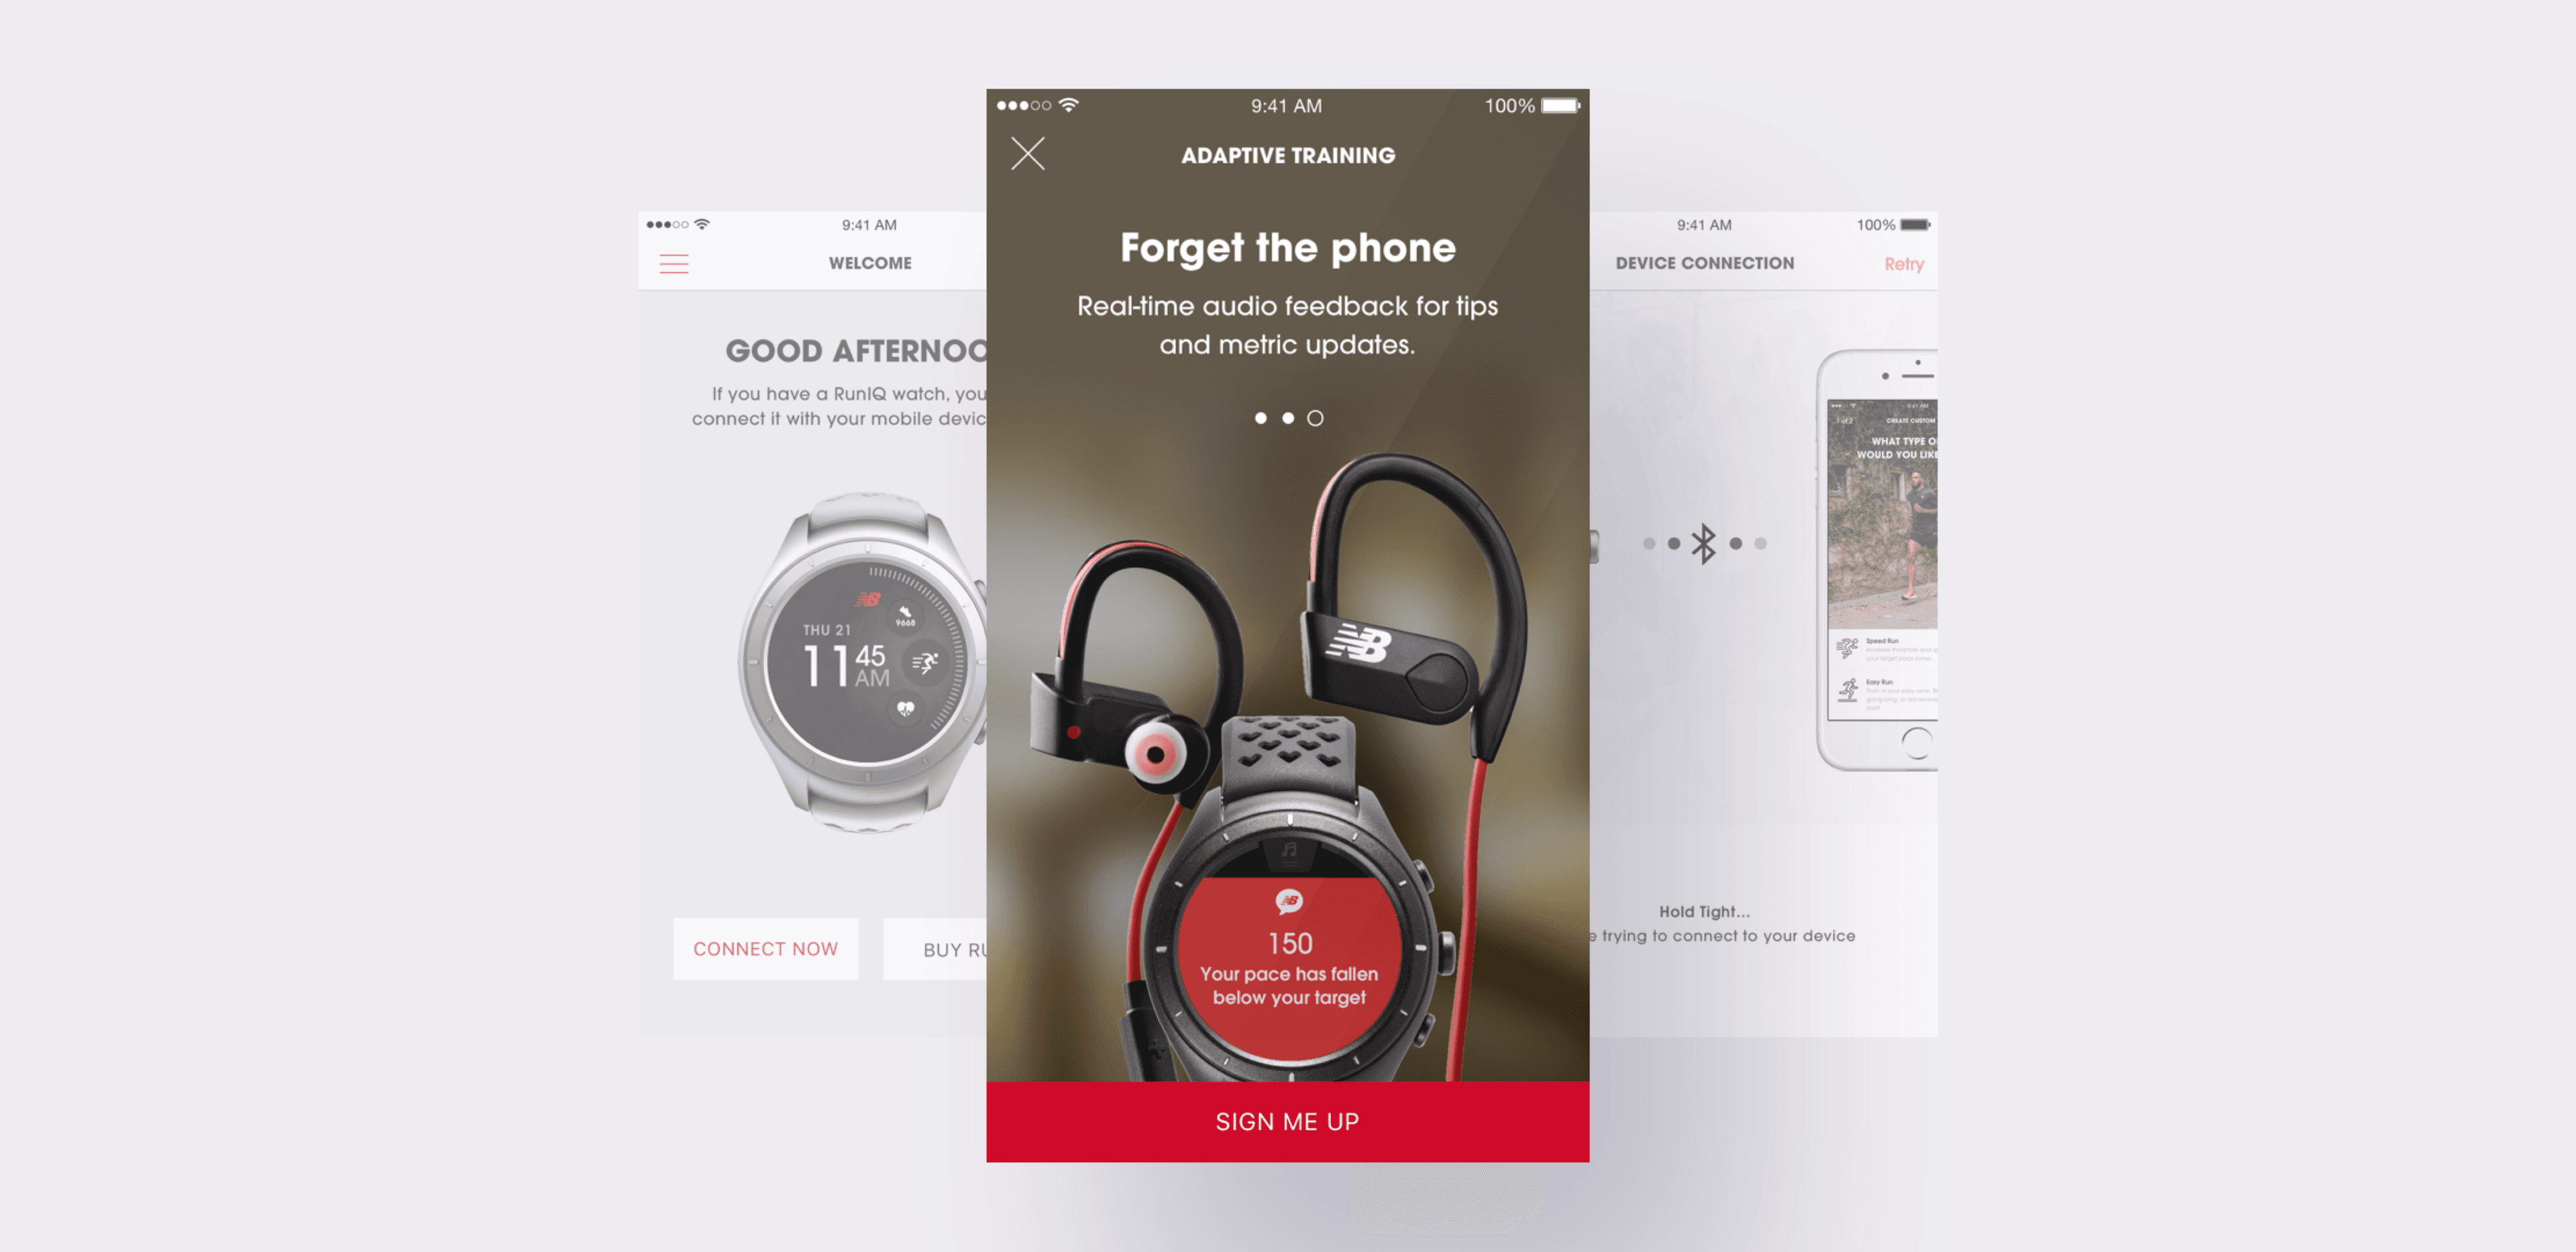 Screenshot of the New Balance app with a watch and earbuds on a sign-up screen.